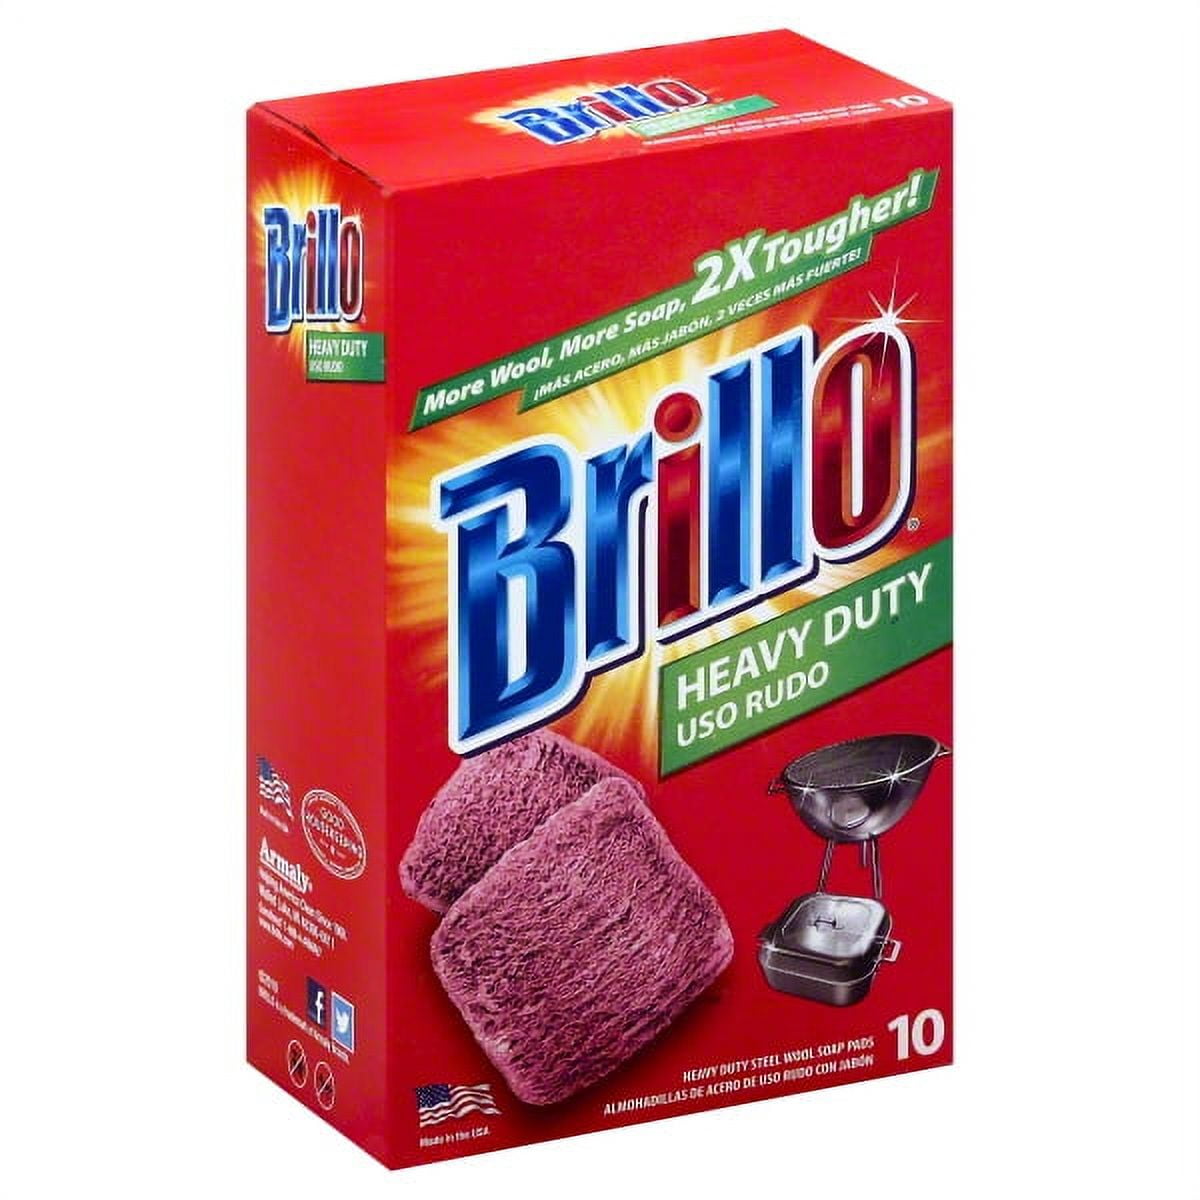 Brillo Steel Wool Soap Pad (18-Count Case of 12) 23318 - The Home